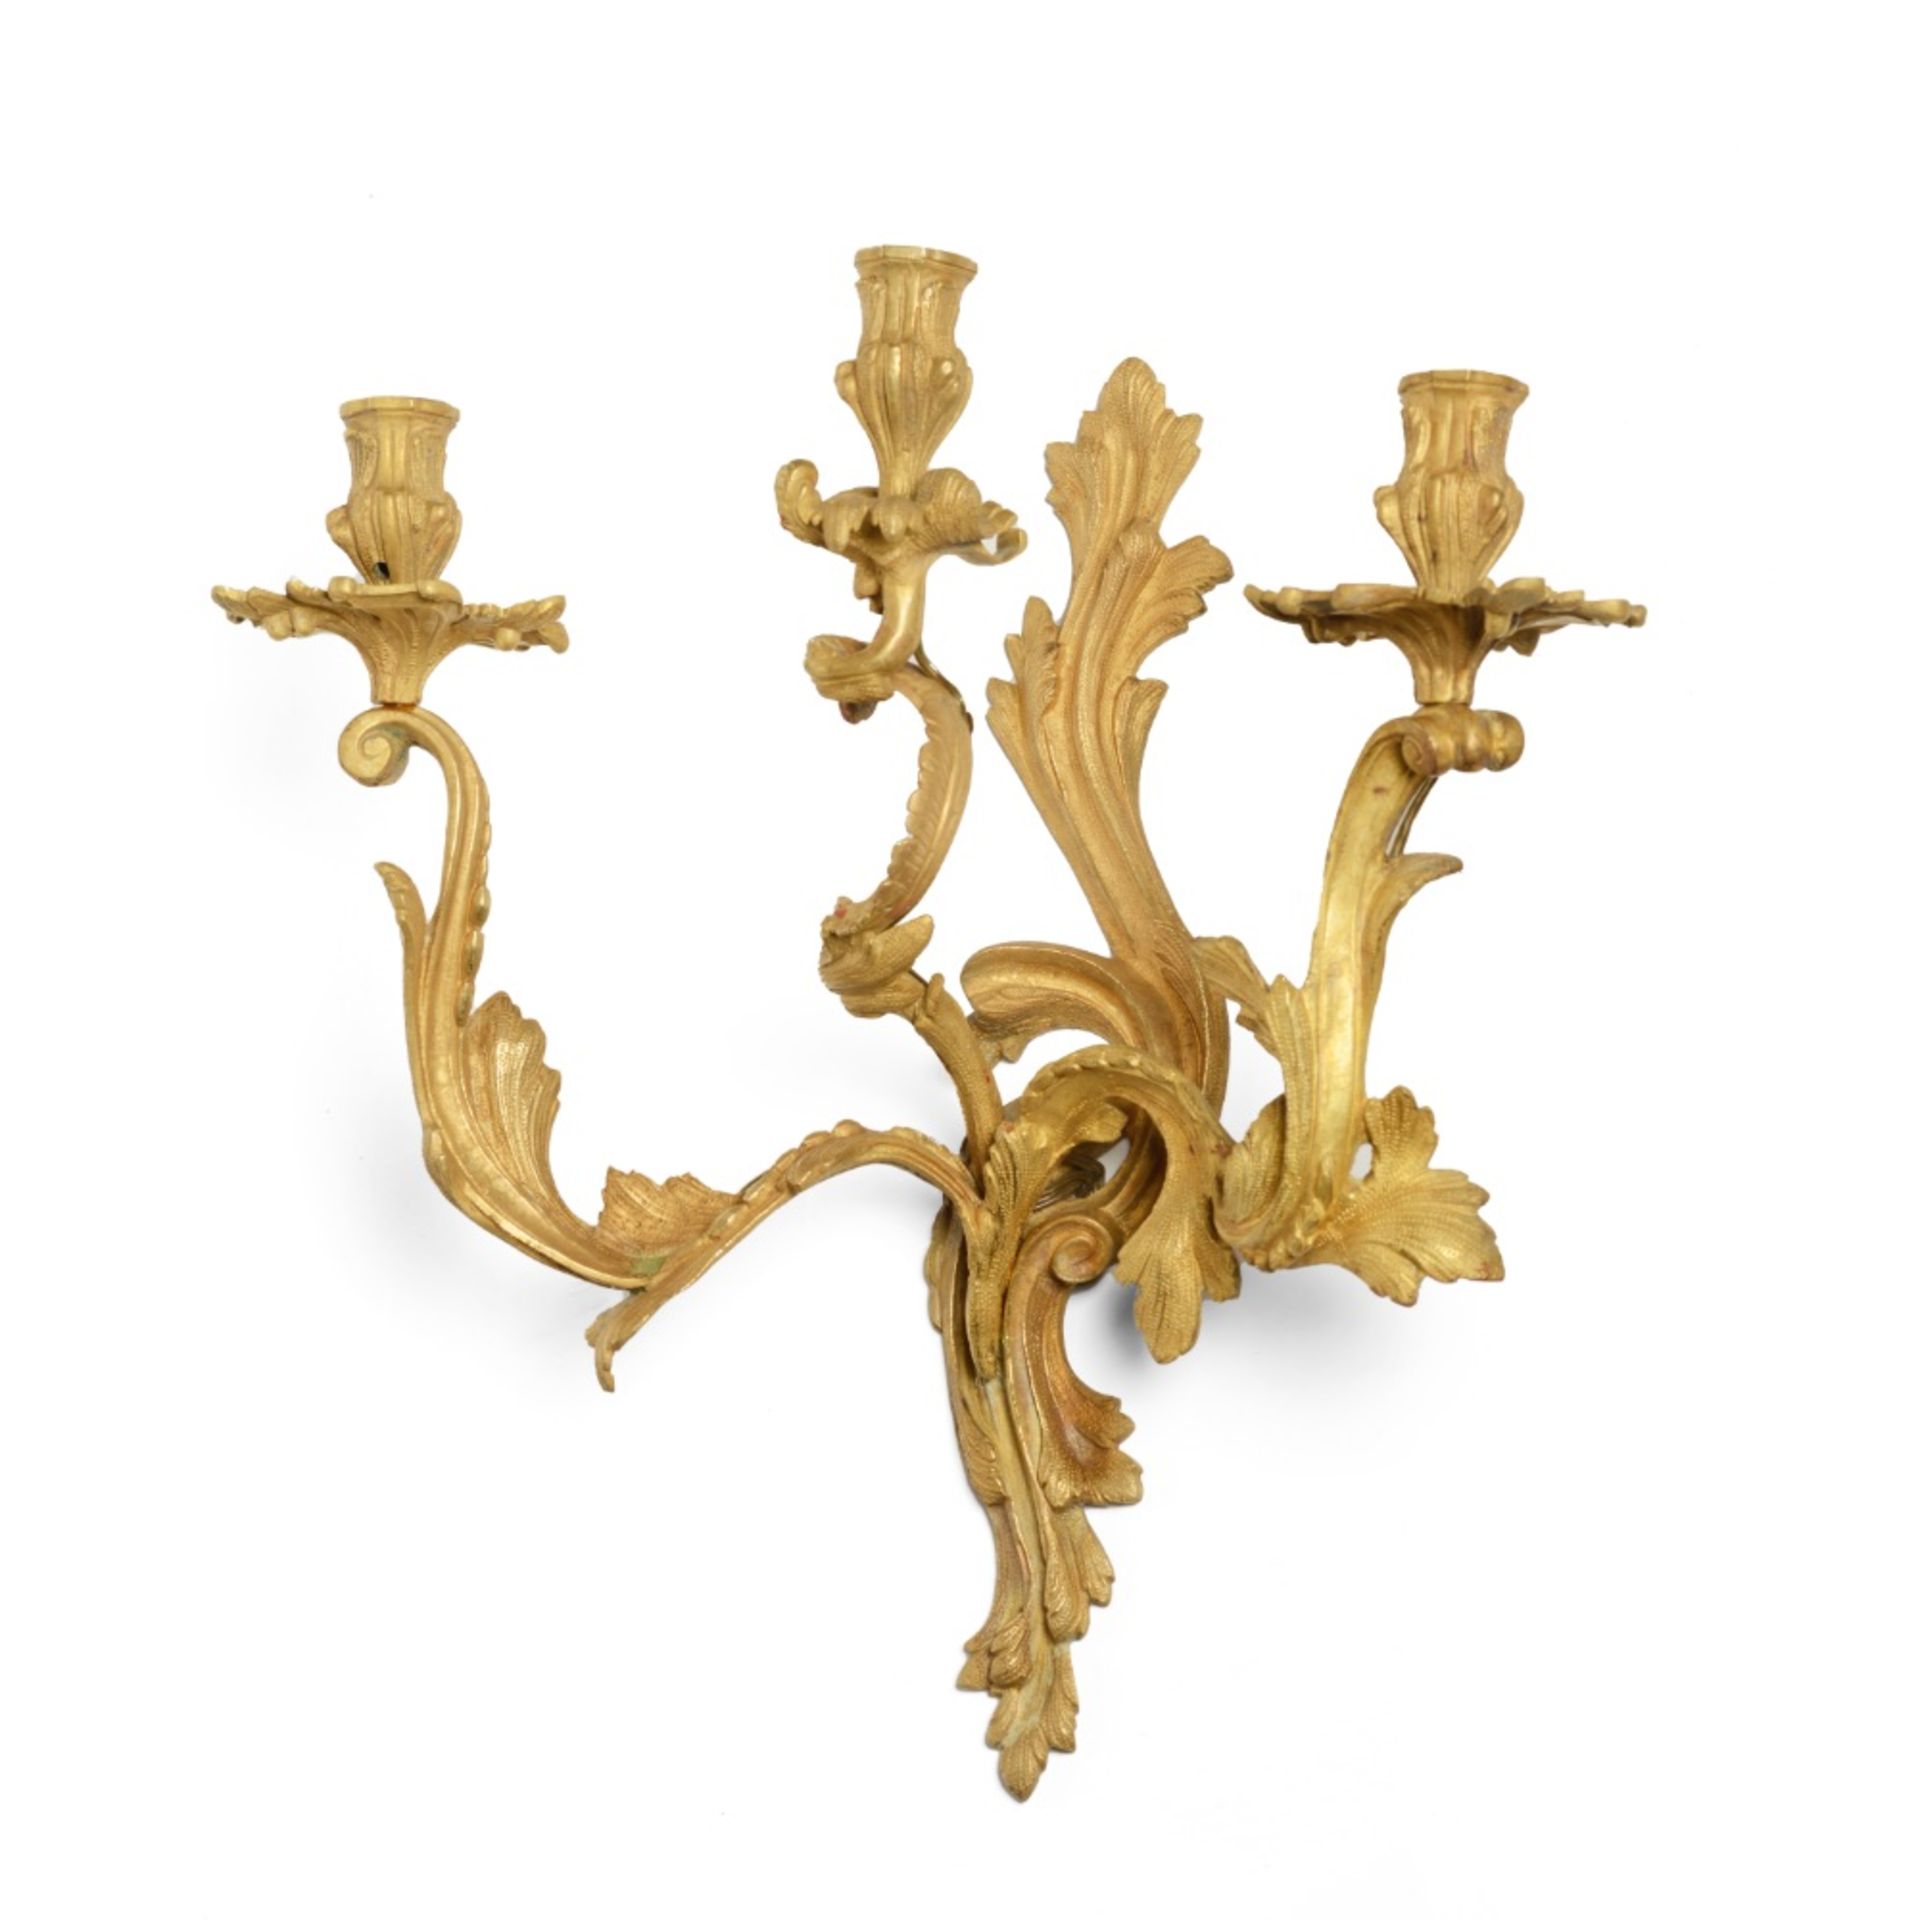 A pair of three branched Louis XVI style wall sconces - Image 2 of 2